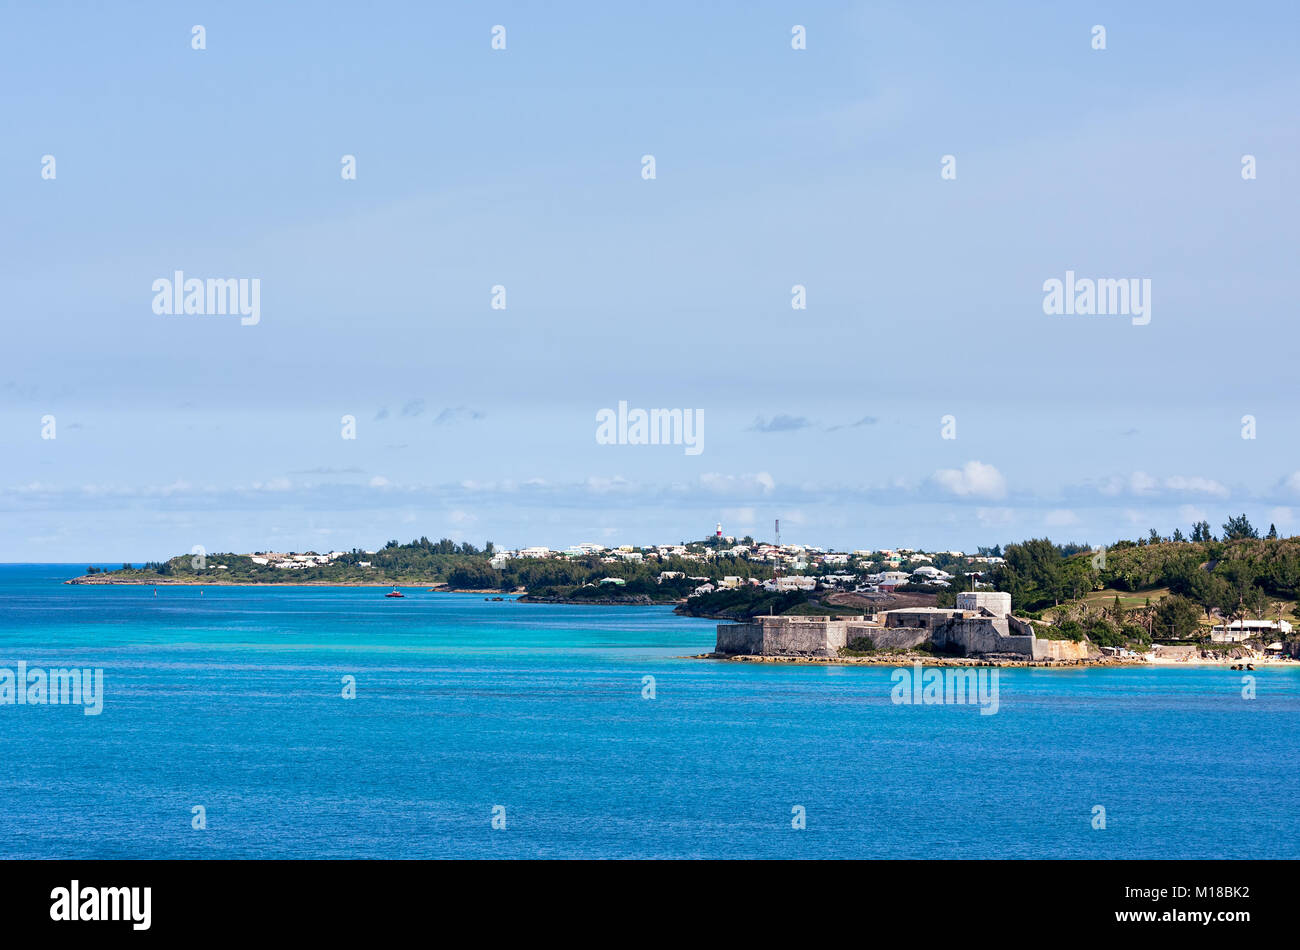 Fort St. Catherine in St. George's Bermuda viewed from the ocean. This fort was built in 1614. Stock Photo